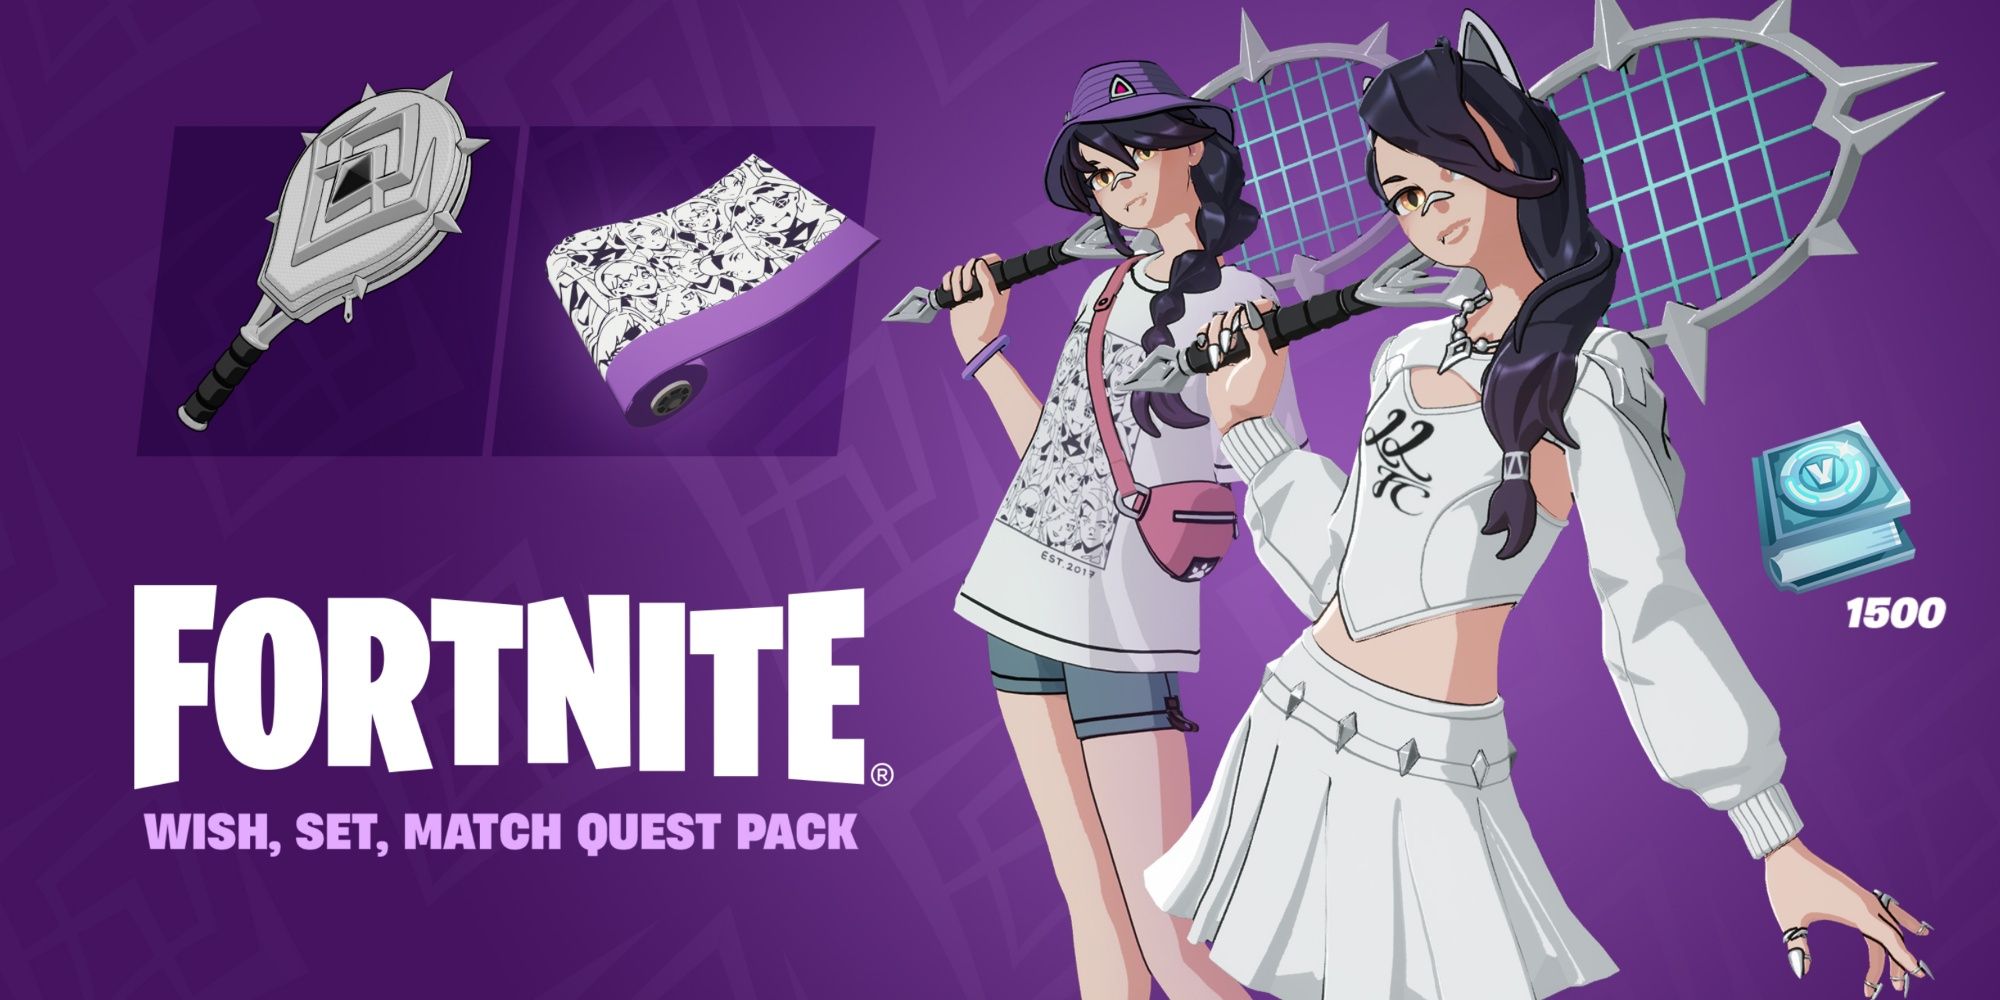 promotional image for the wish set match quest pack